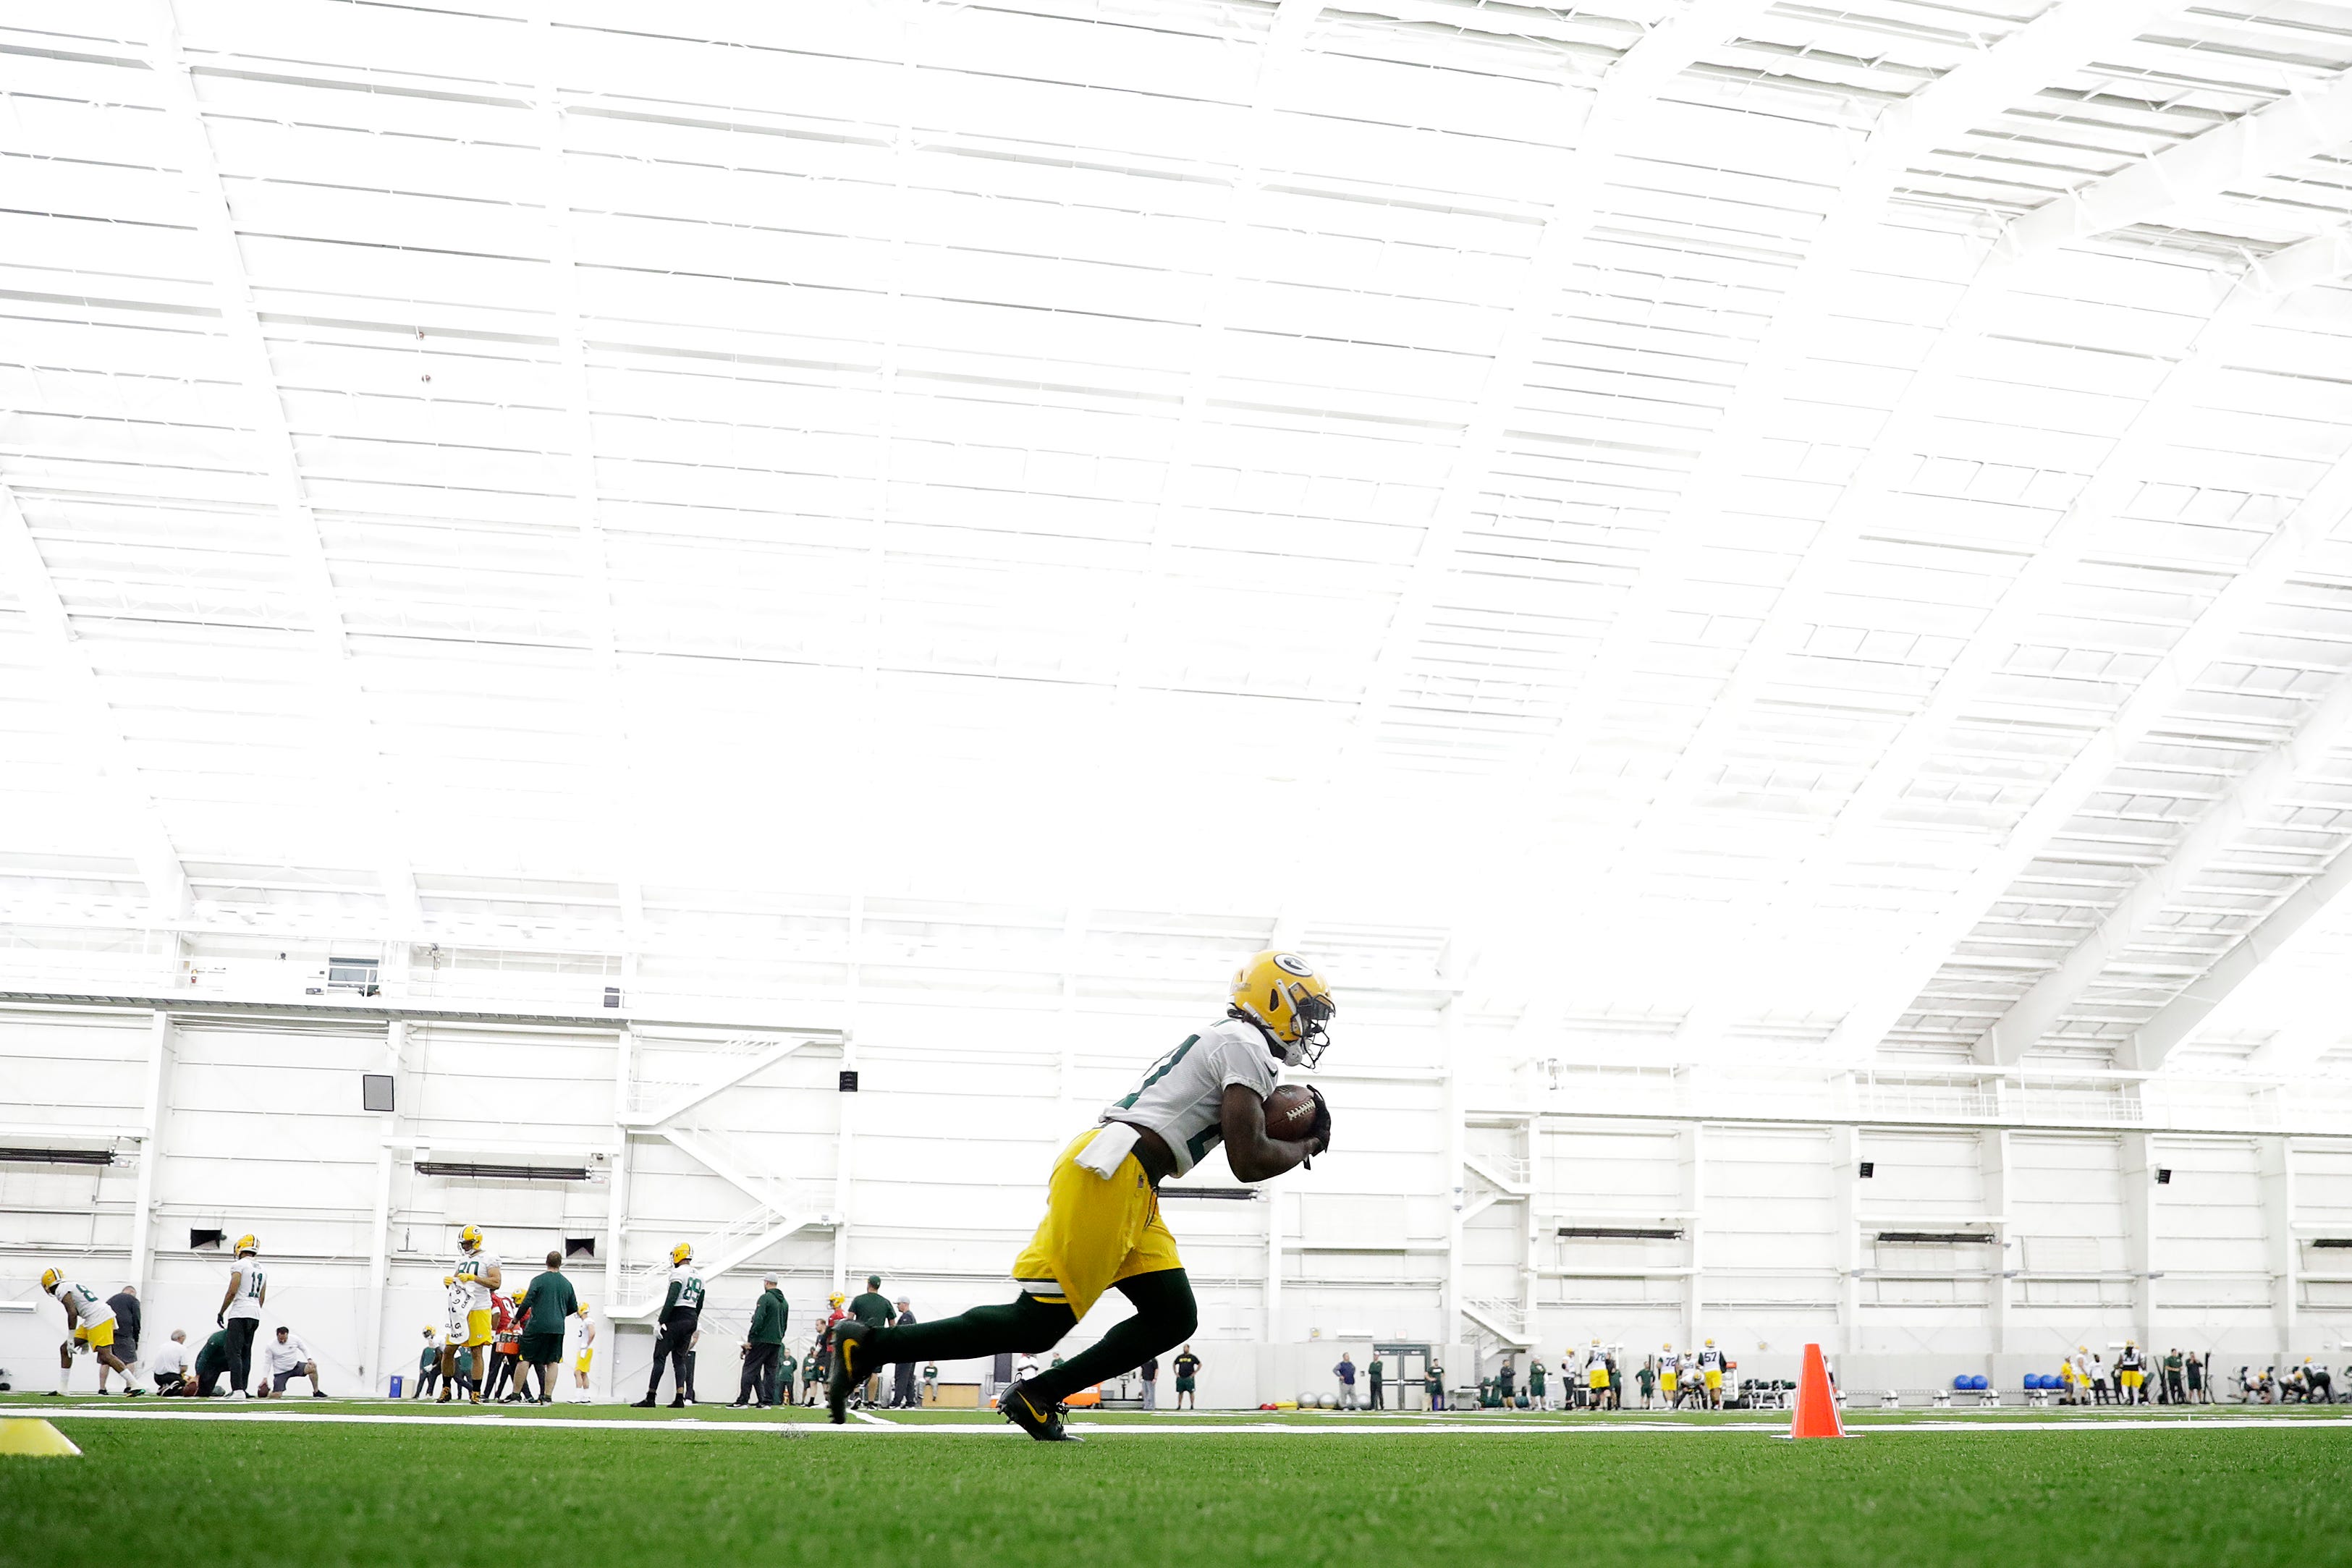 Green Bay Packers running back Lavon Coleman (27) during a team practice at the Don Hutson Center on Wednesday, April 24, 2019 in Ashwaubenon, Wis.